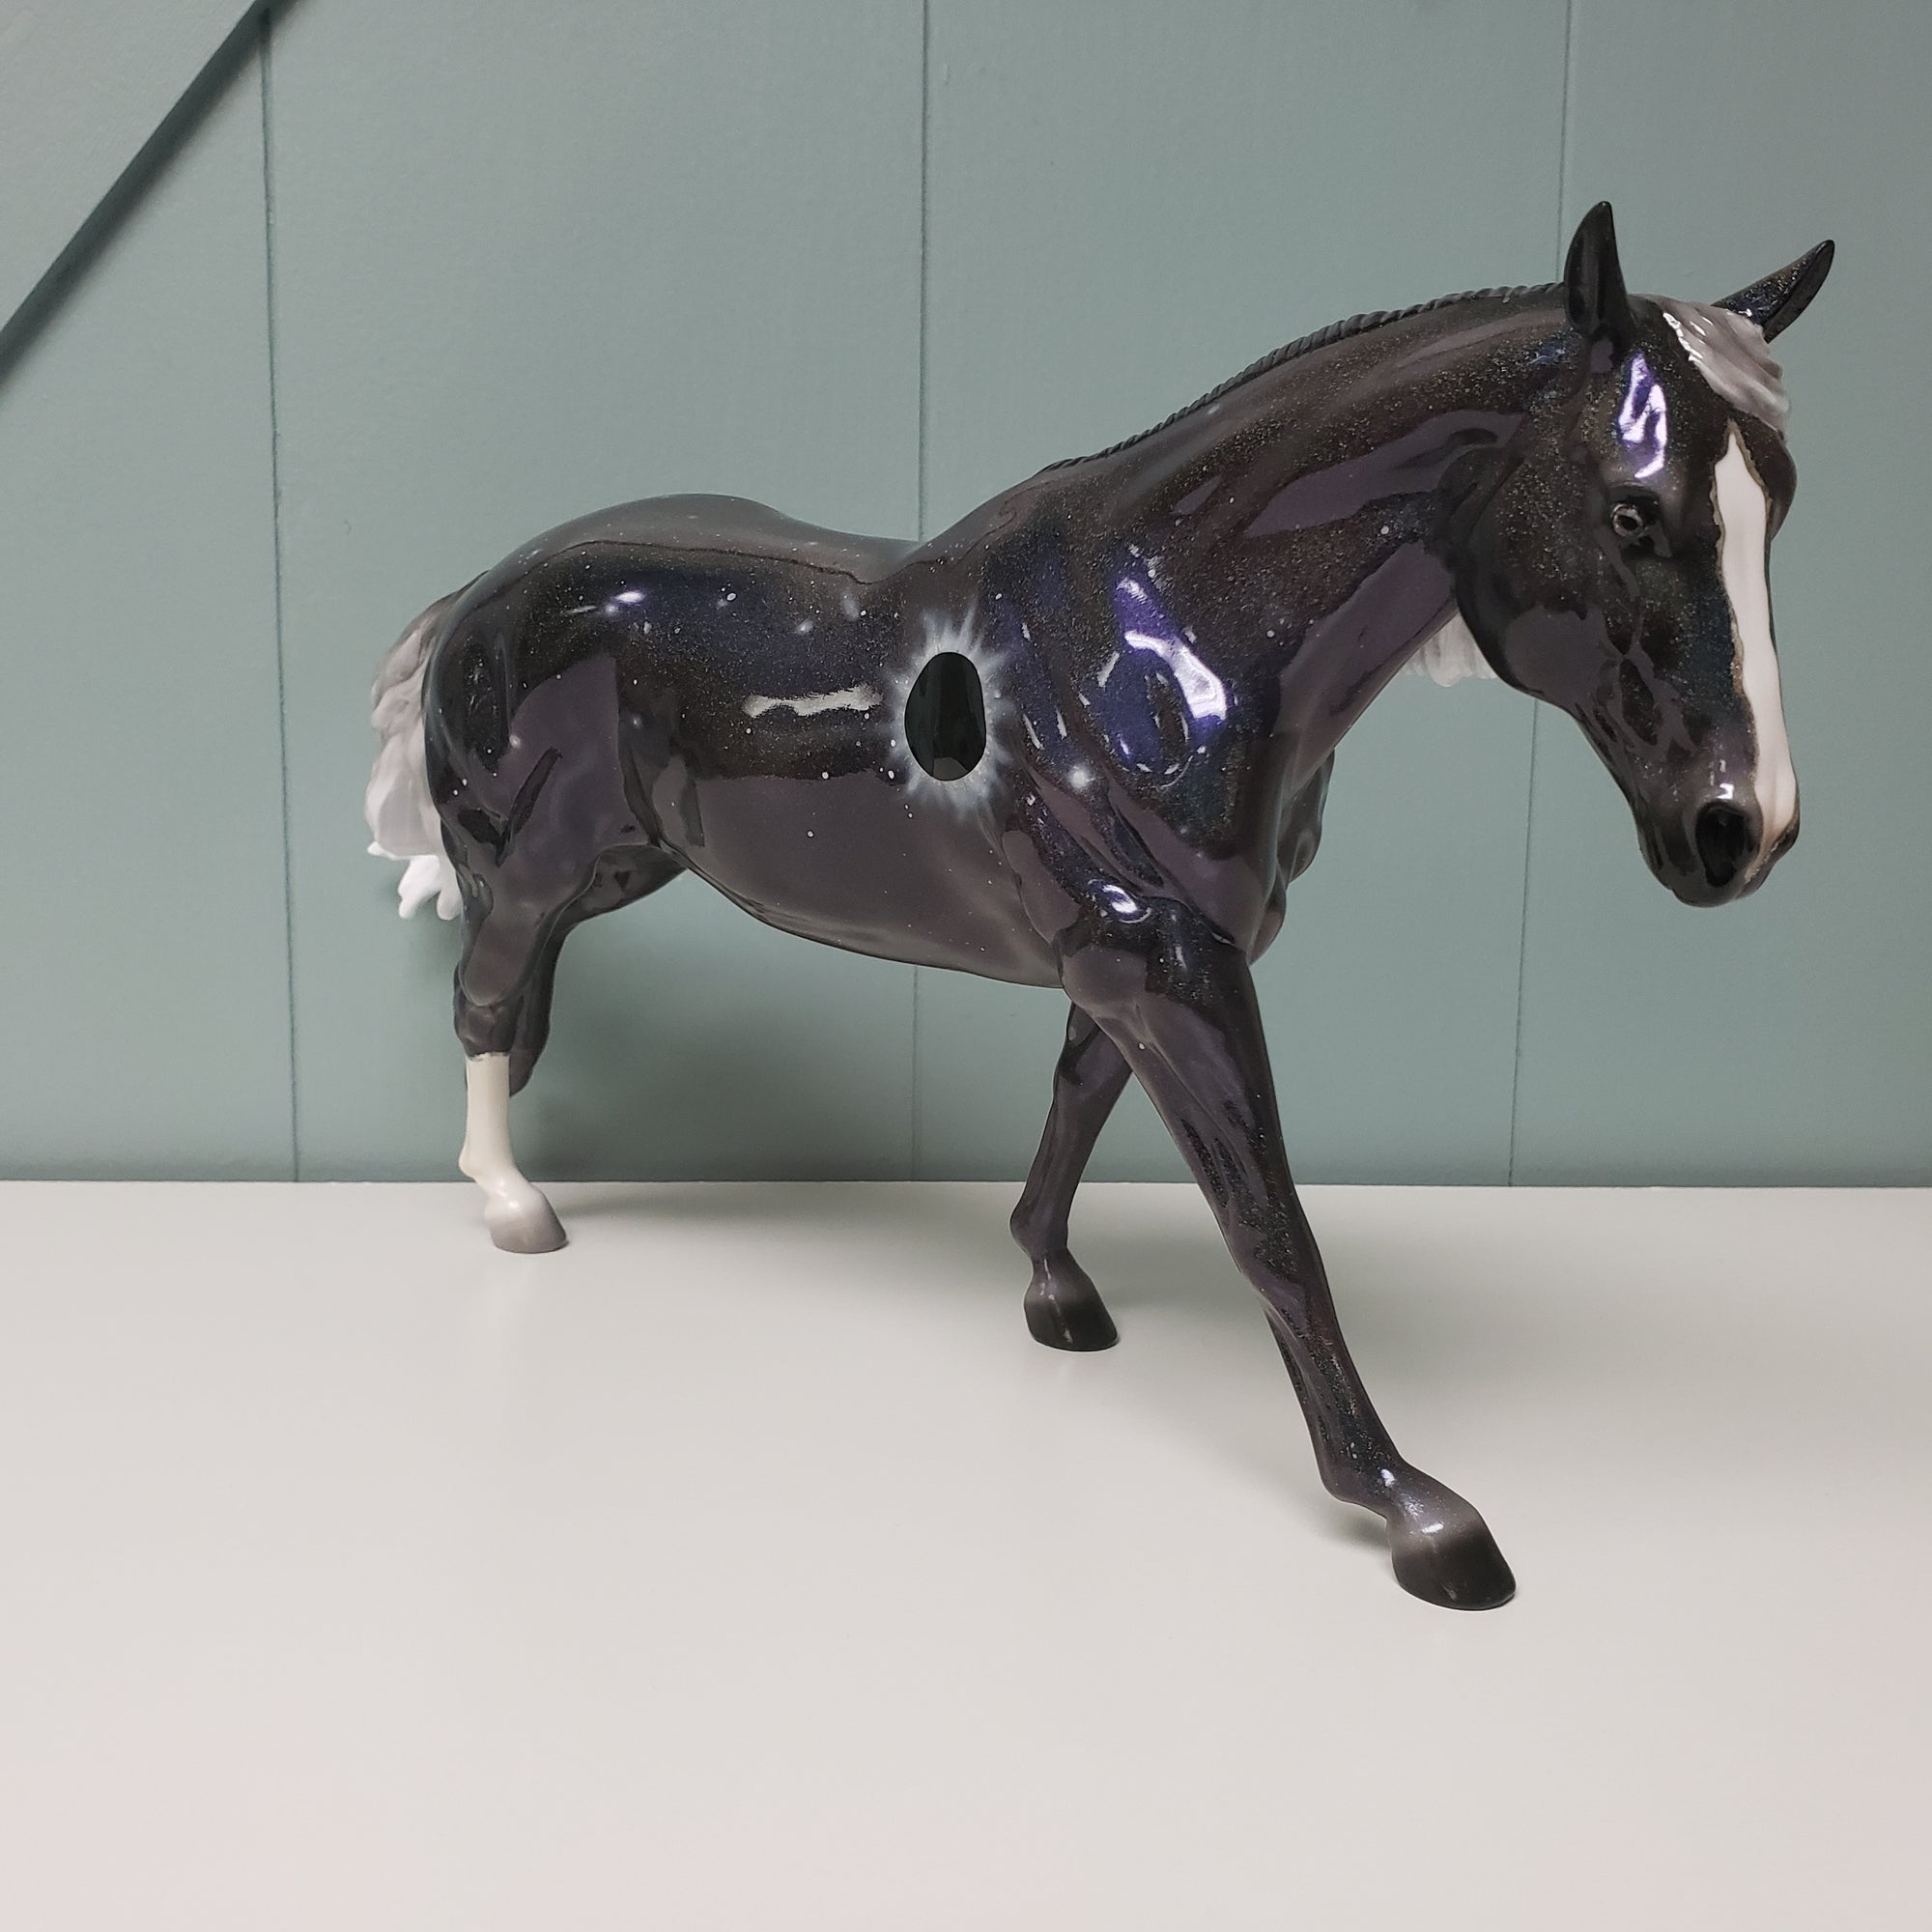 Totality OOAK Deco Holographic Night Sky and Eclipse Running Stock Horse by Ellen Robbins - Best Offers 4/9/24